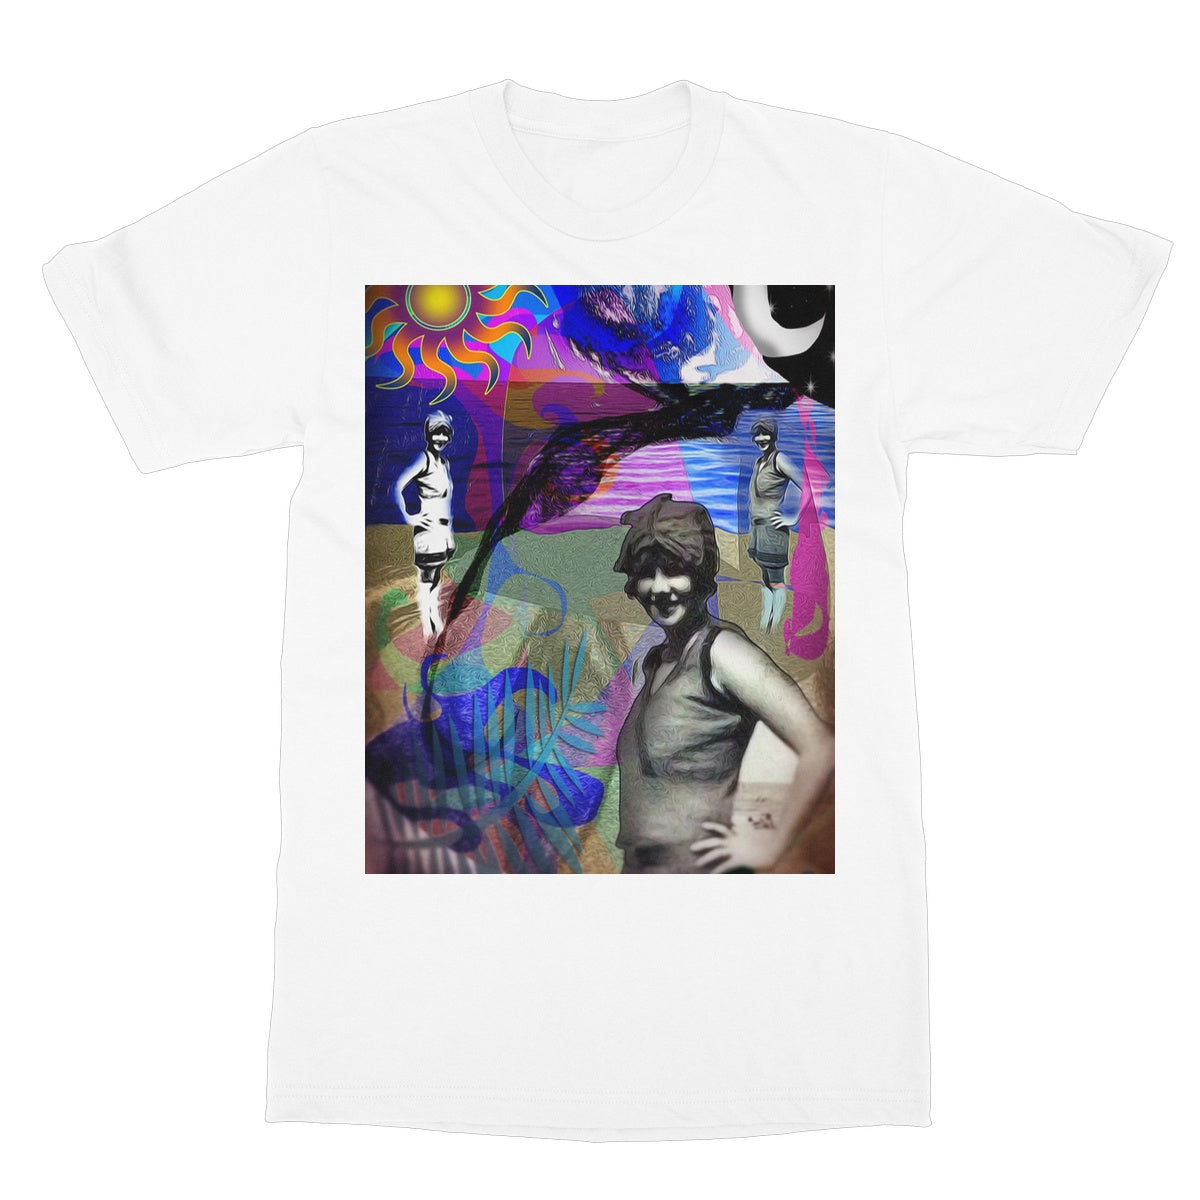 The Swimmer Softstyle T-Shirt